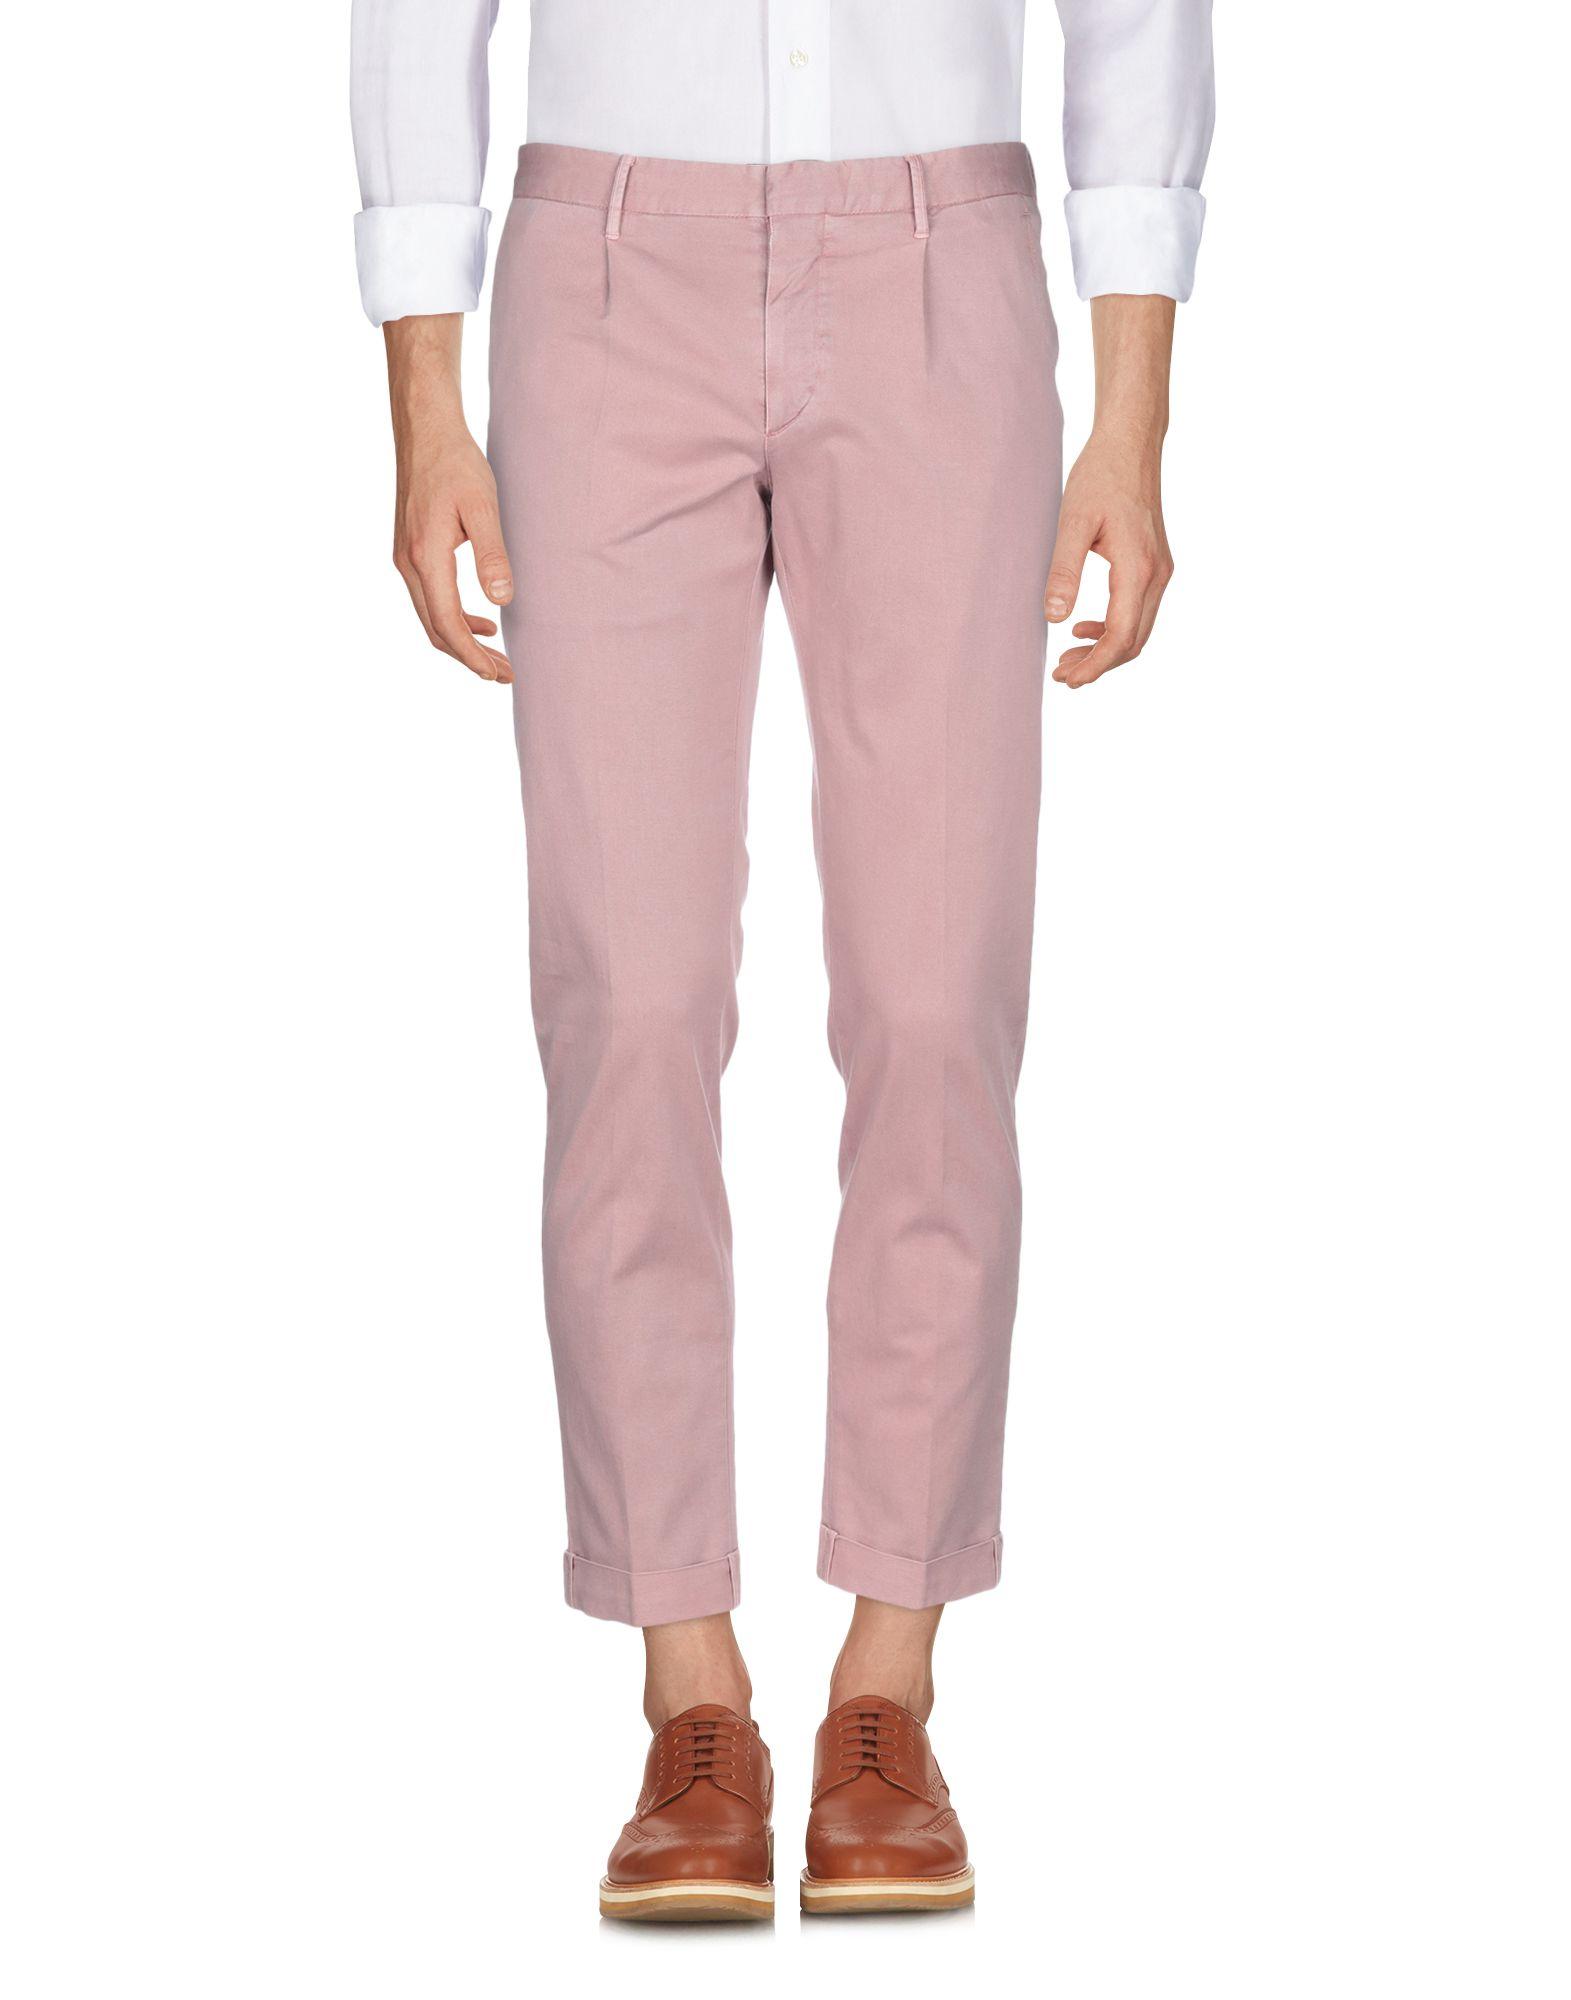 GTA IL PANTALONE Cotton Casual Pants in Pink for Men - Lyst